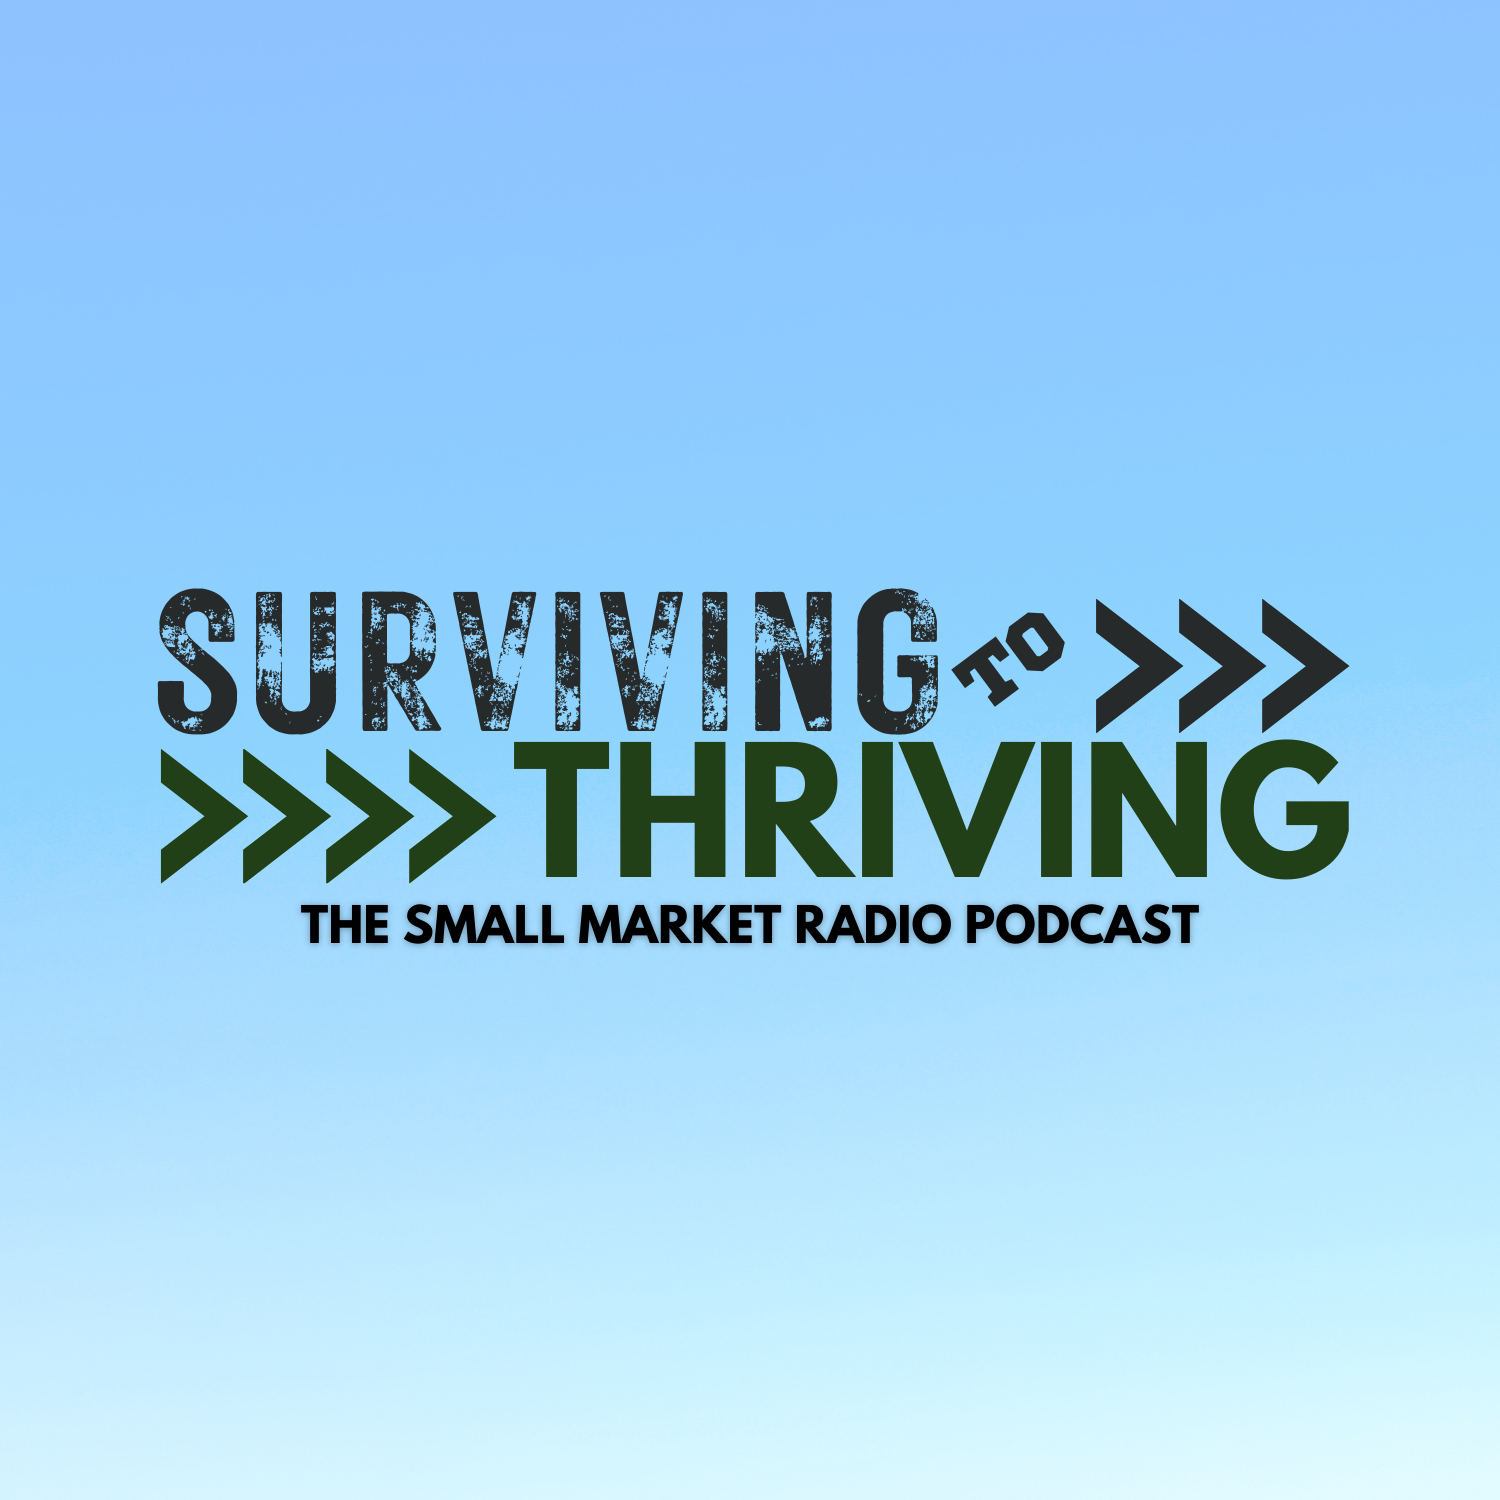 Surviving to Thriving: The Small Market Radio Podcast